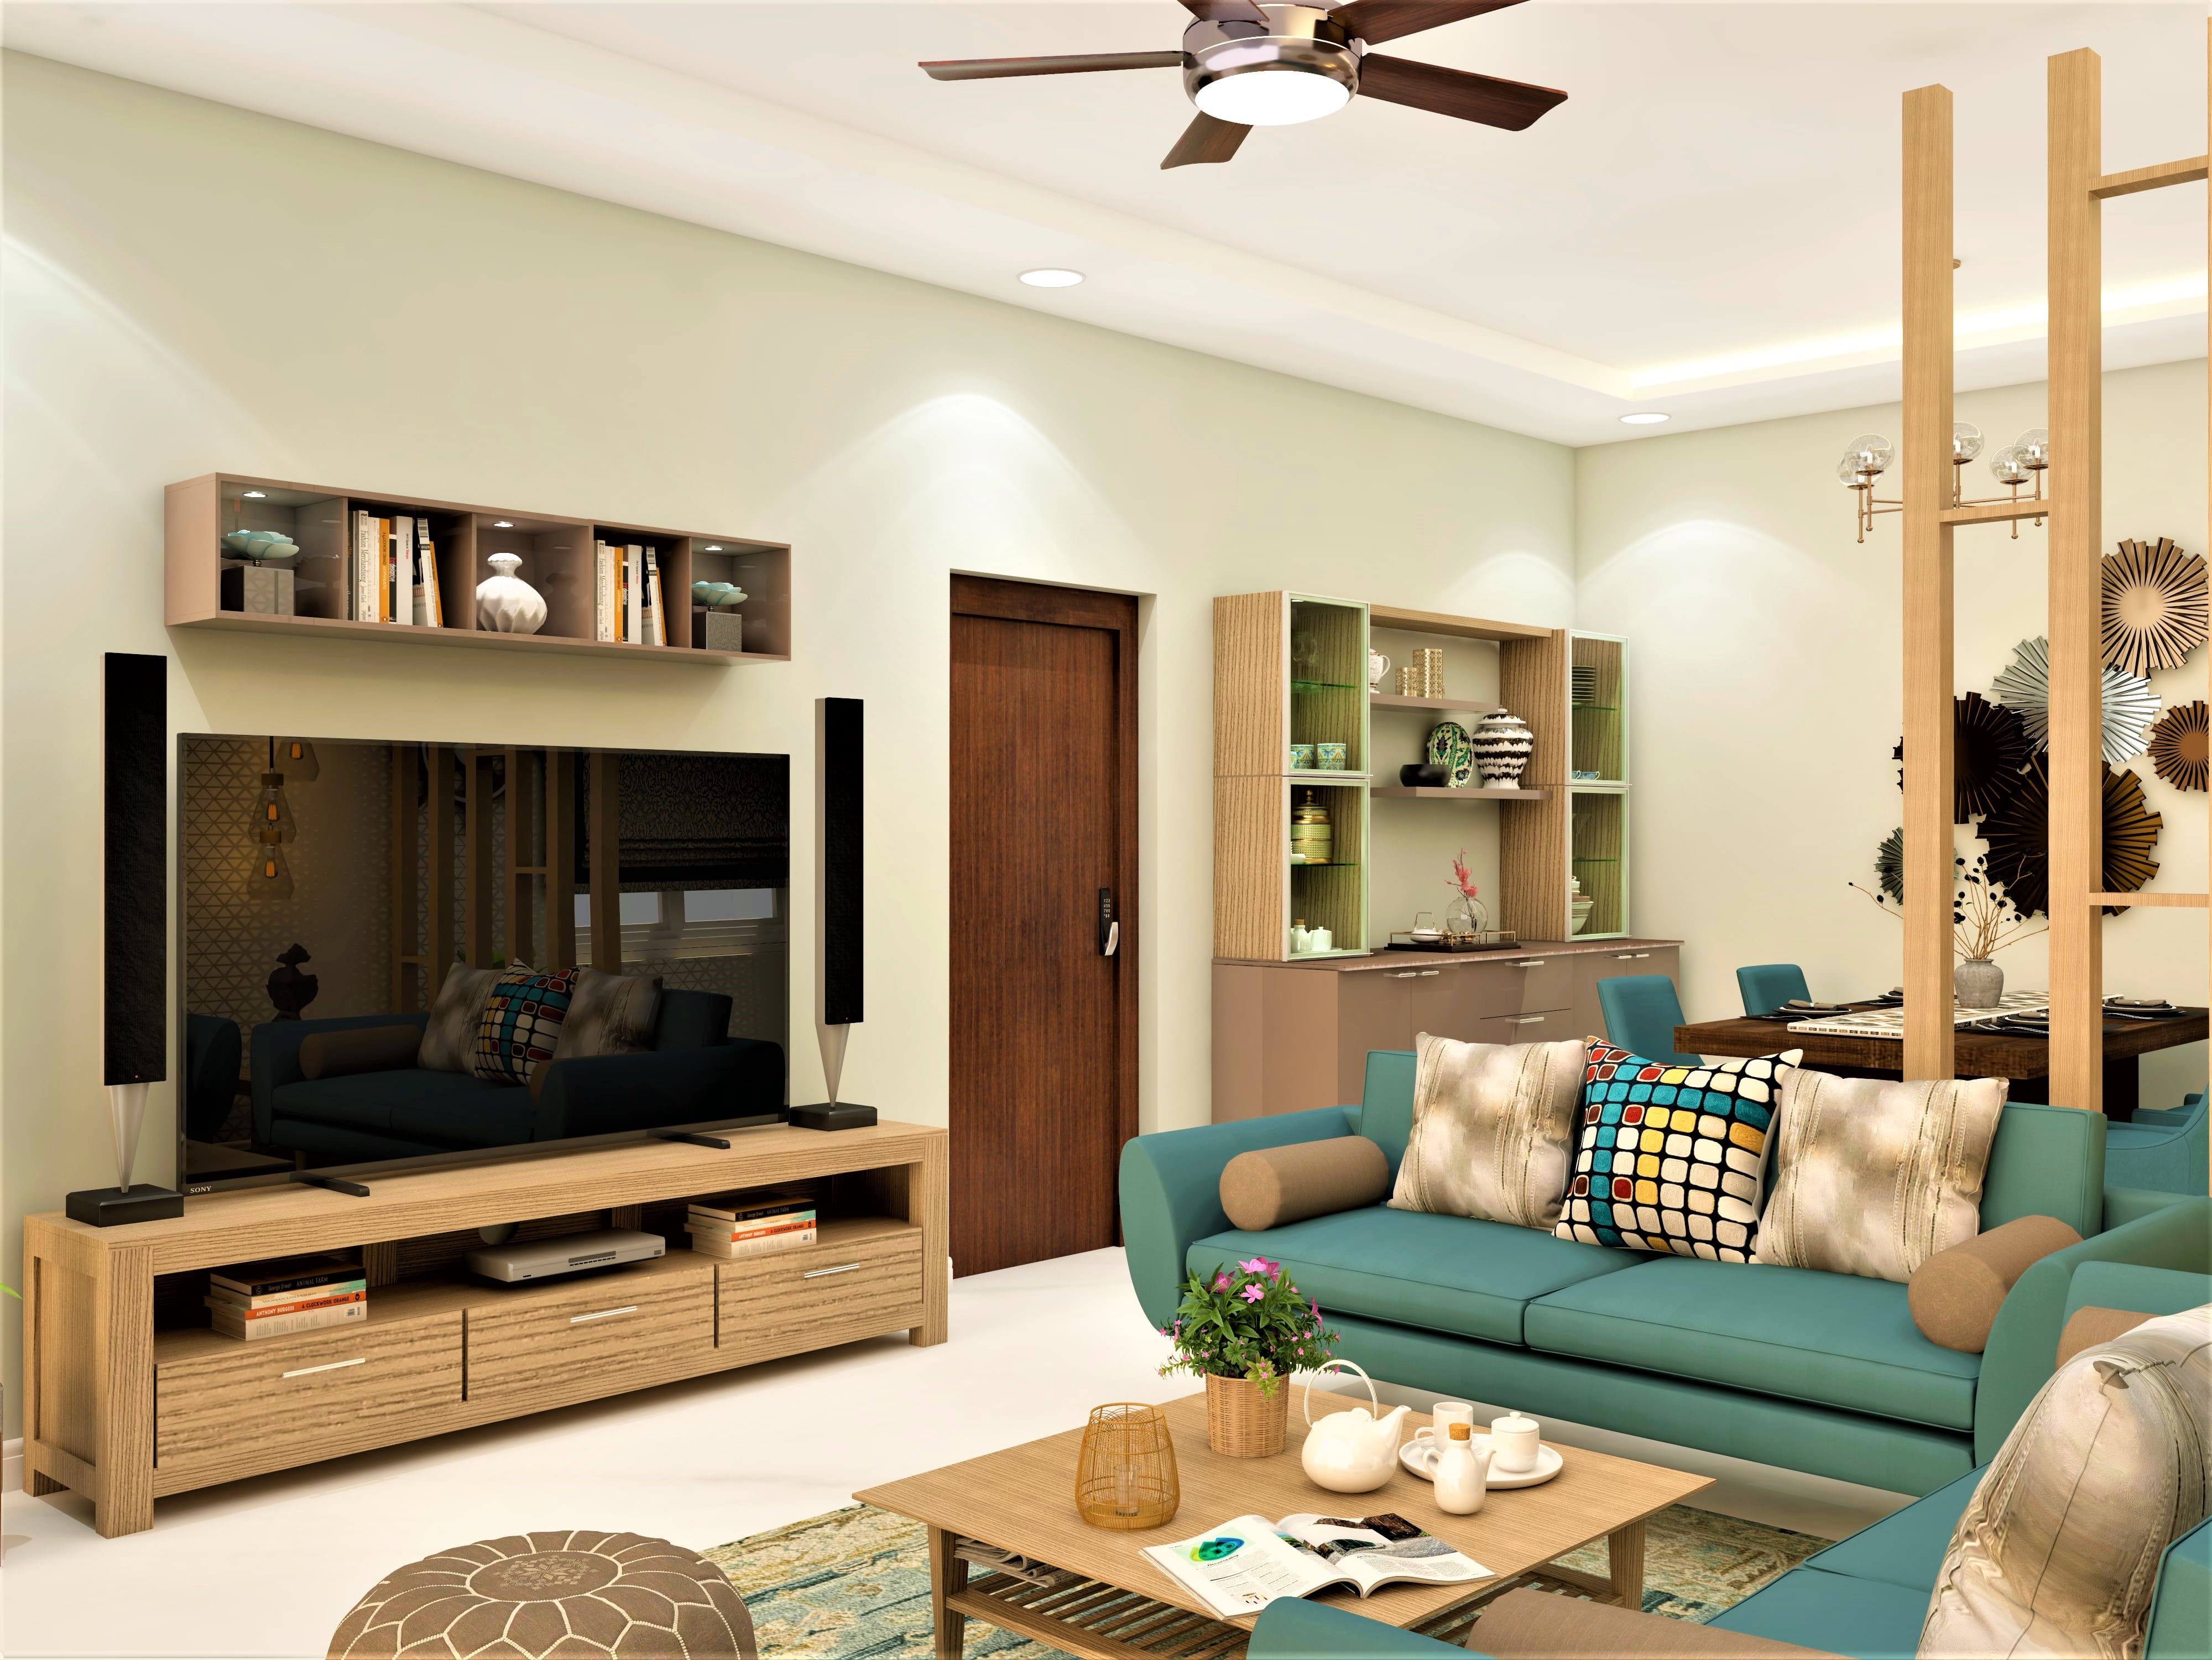 Modern living room design with wooden partition - Beautiful Homes